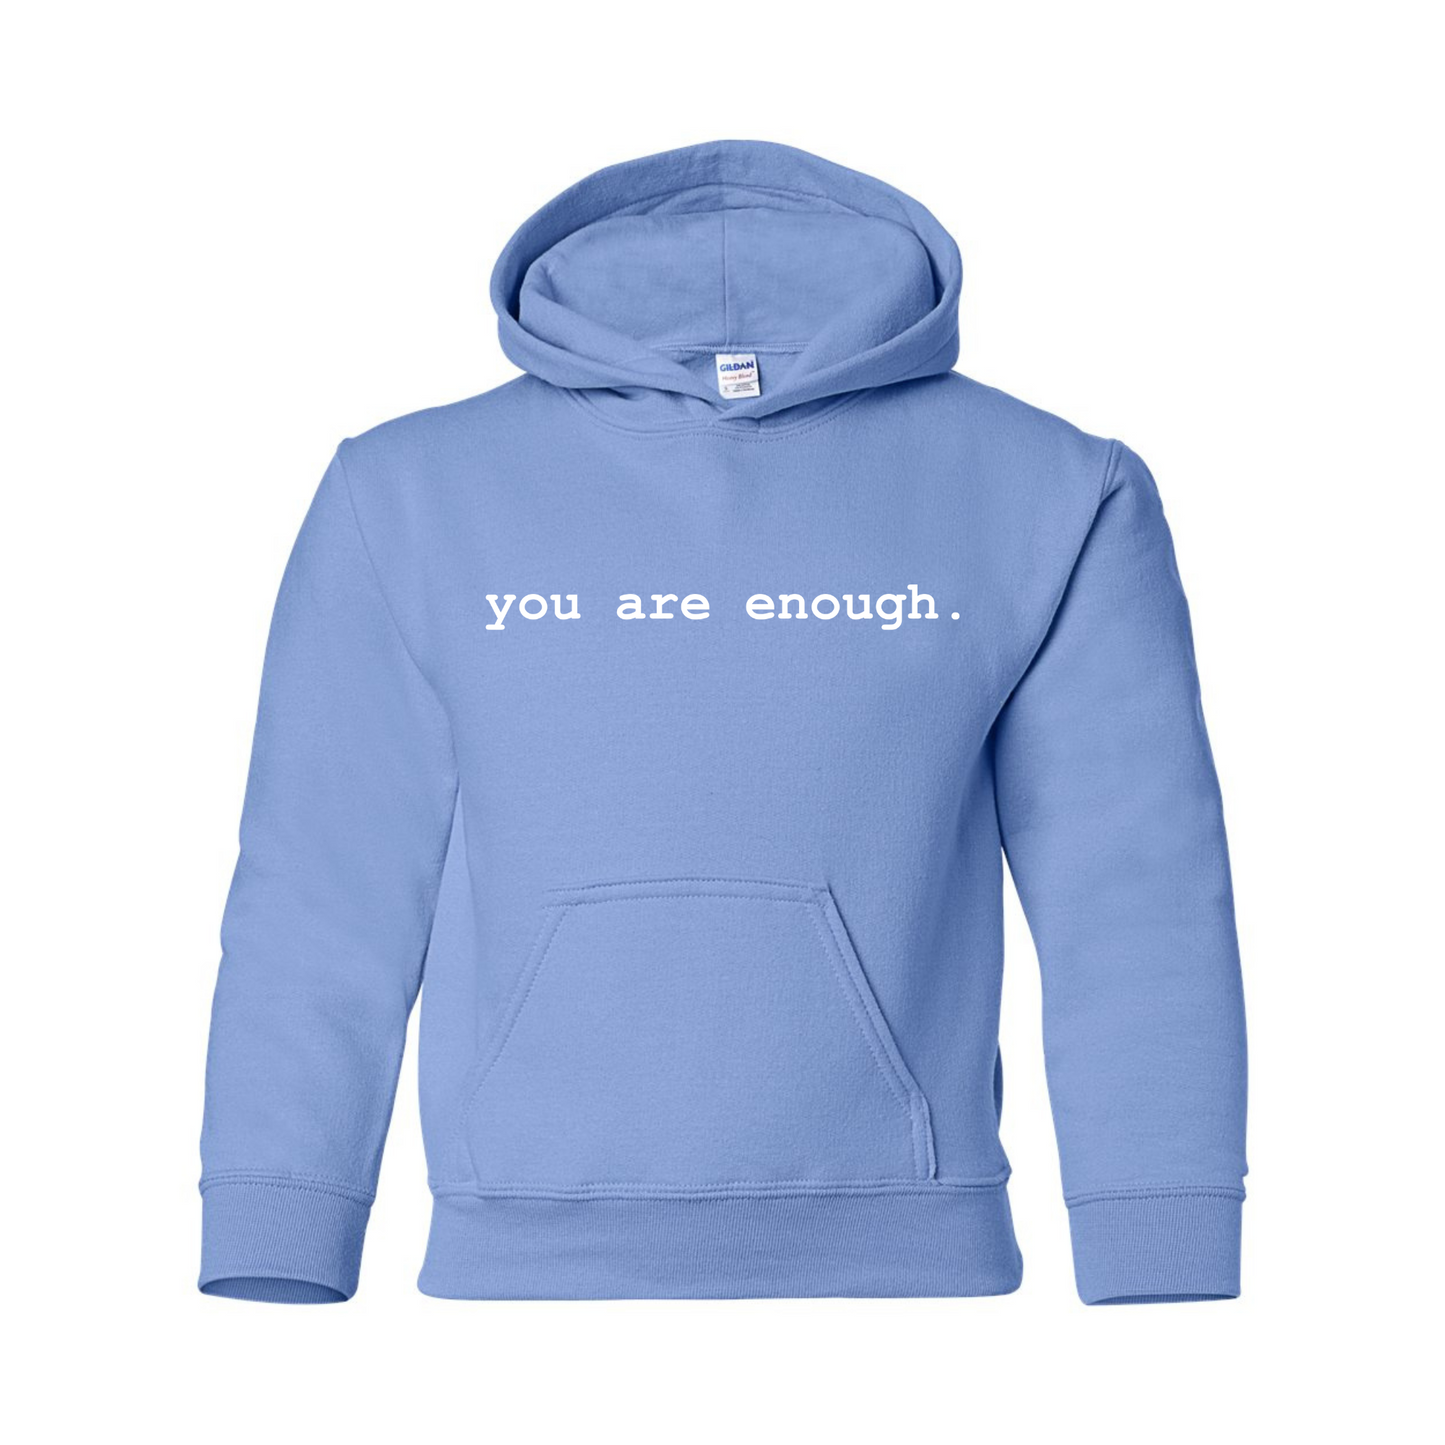 You Are Enough Hoodie - Youth Sizes